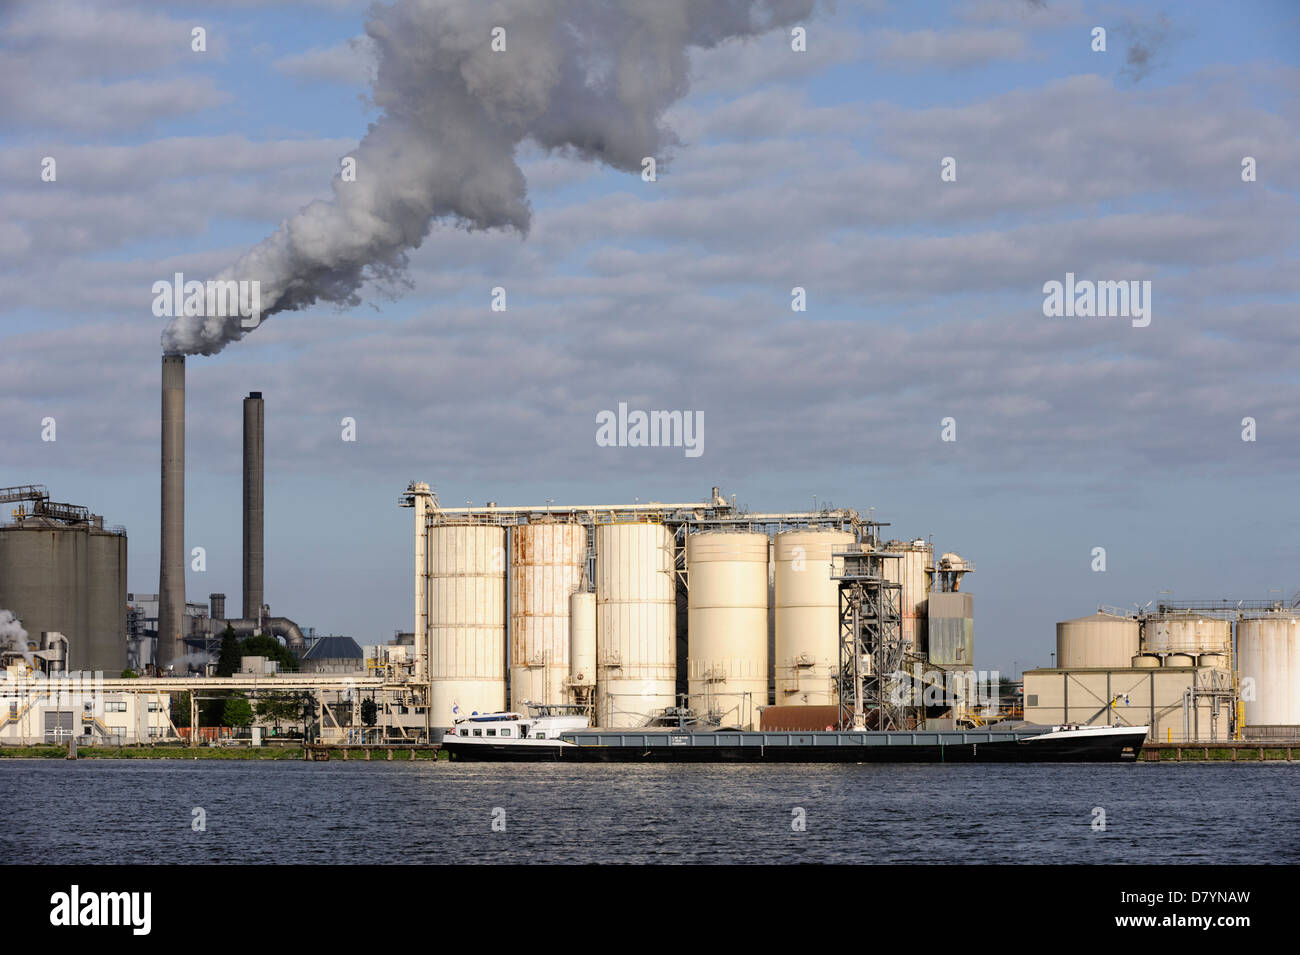 Coal burning energy plant with container terminal and river in foreground, Amsterdam, the Netherlands, Europe Stock Photo